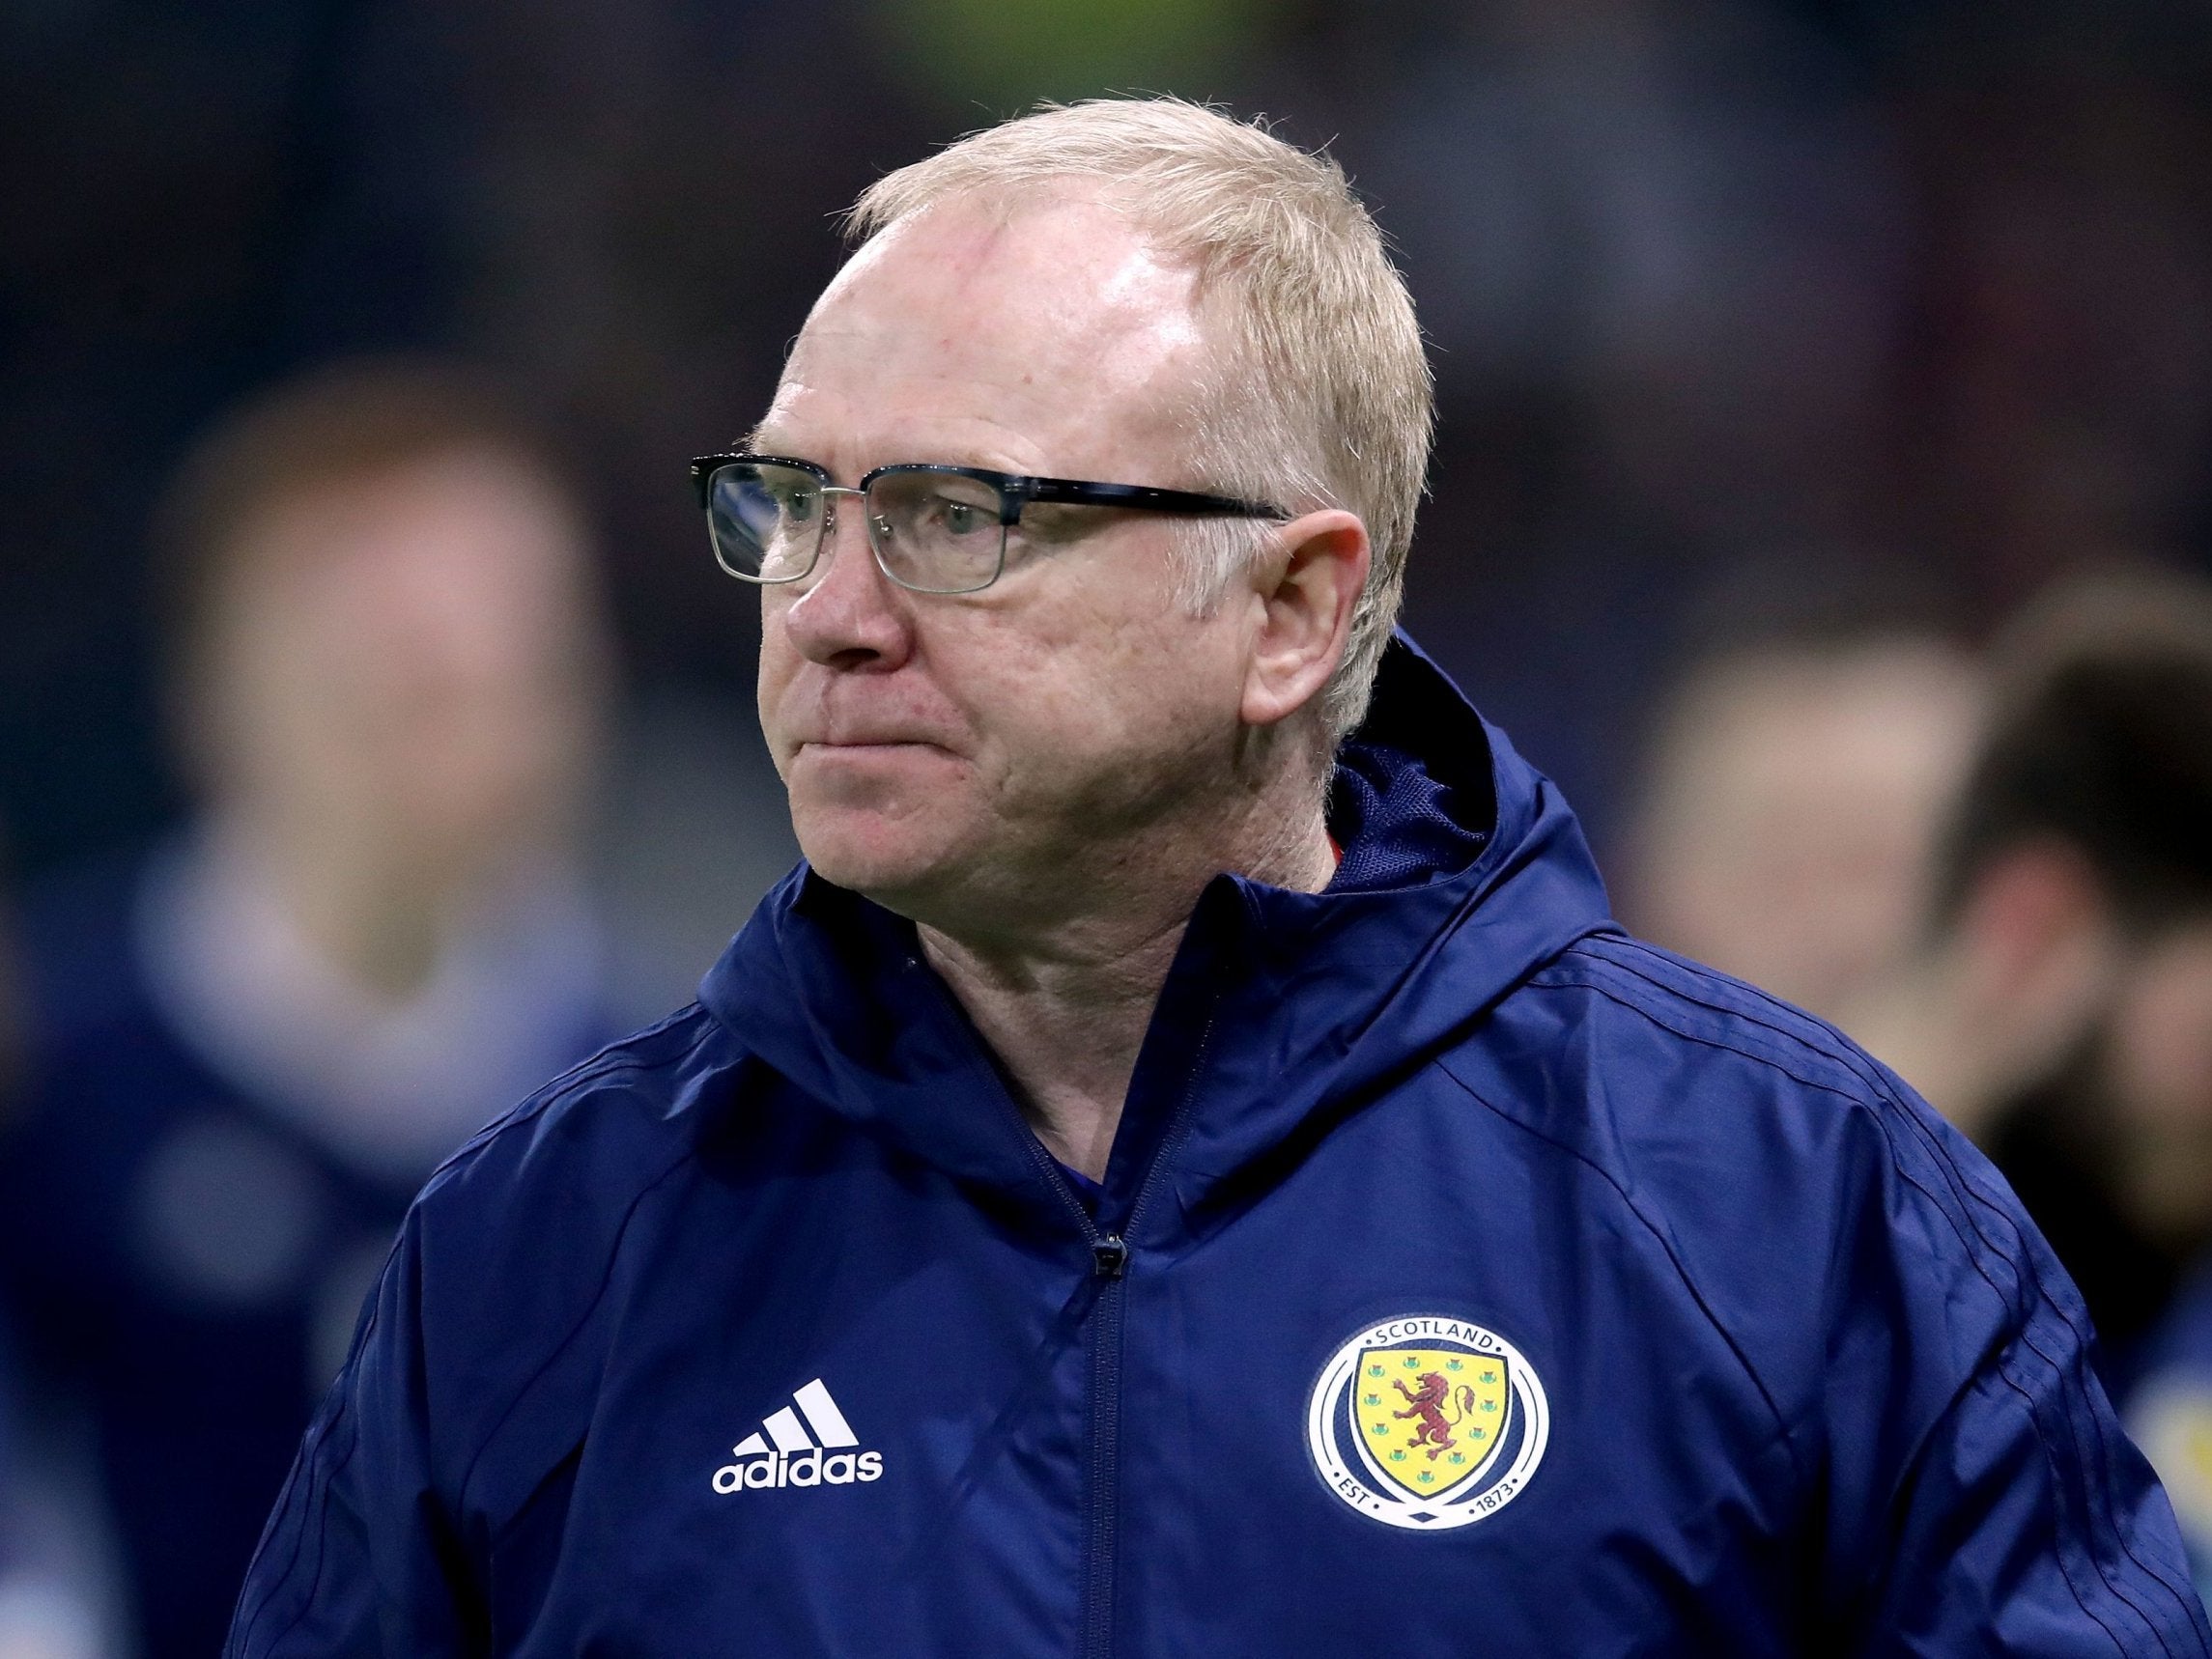 Alex McLeish is facing the sack, according to reports in Scotland